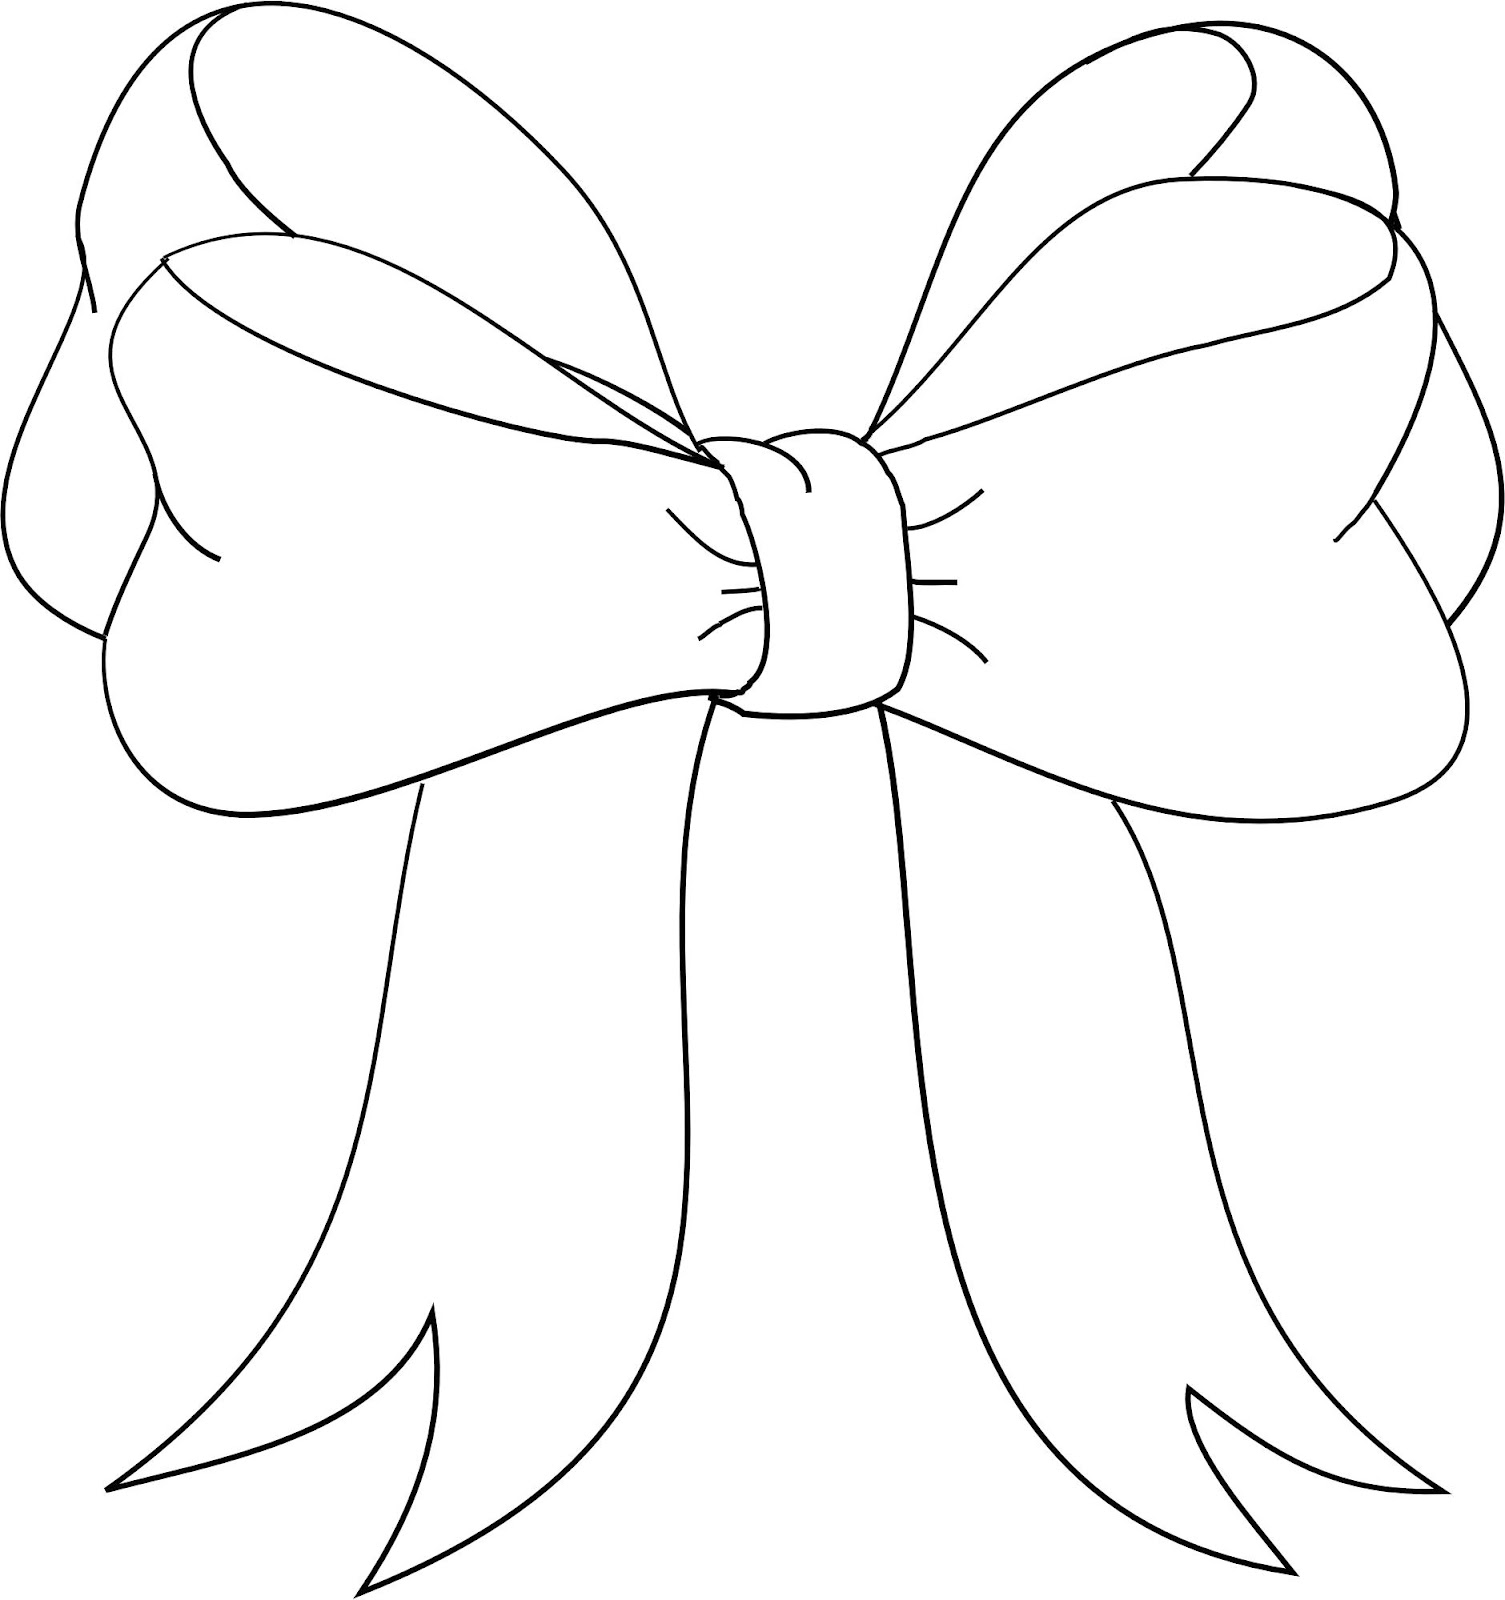 Free Bow Outline, Download Free Bow Outline png images, Free ClipArts ...